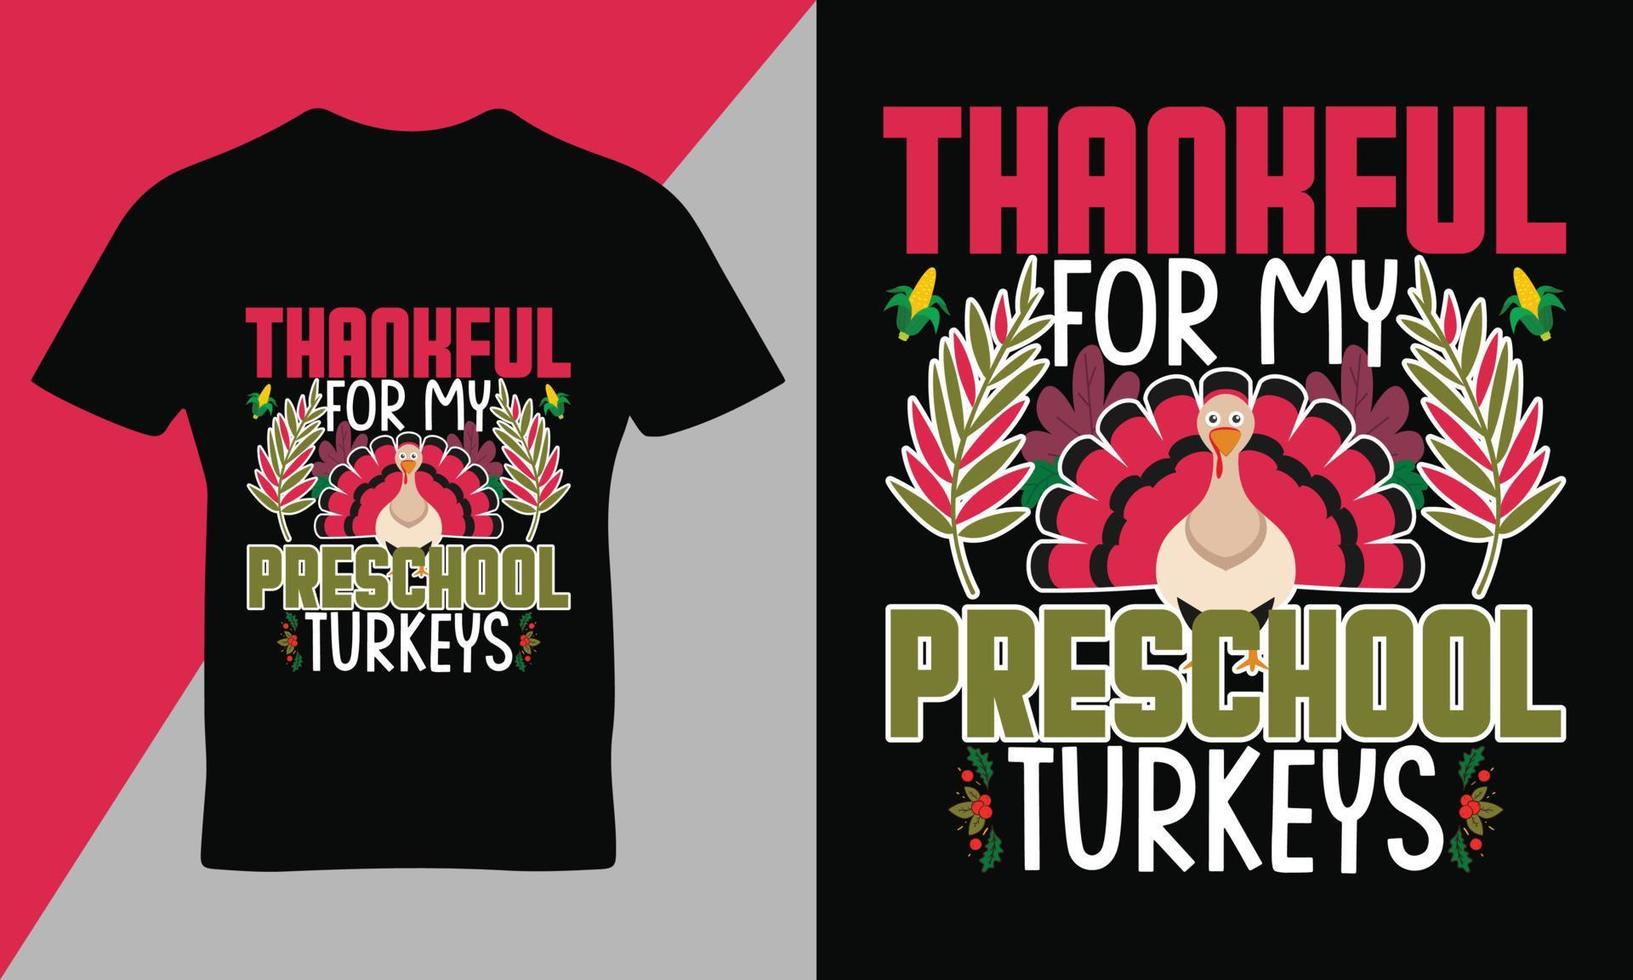 Thanks giving quote t-shirt template, typography t-shirt design vector